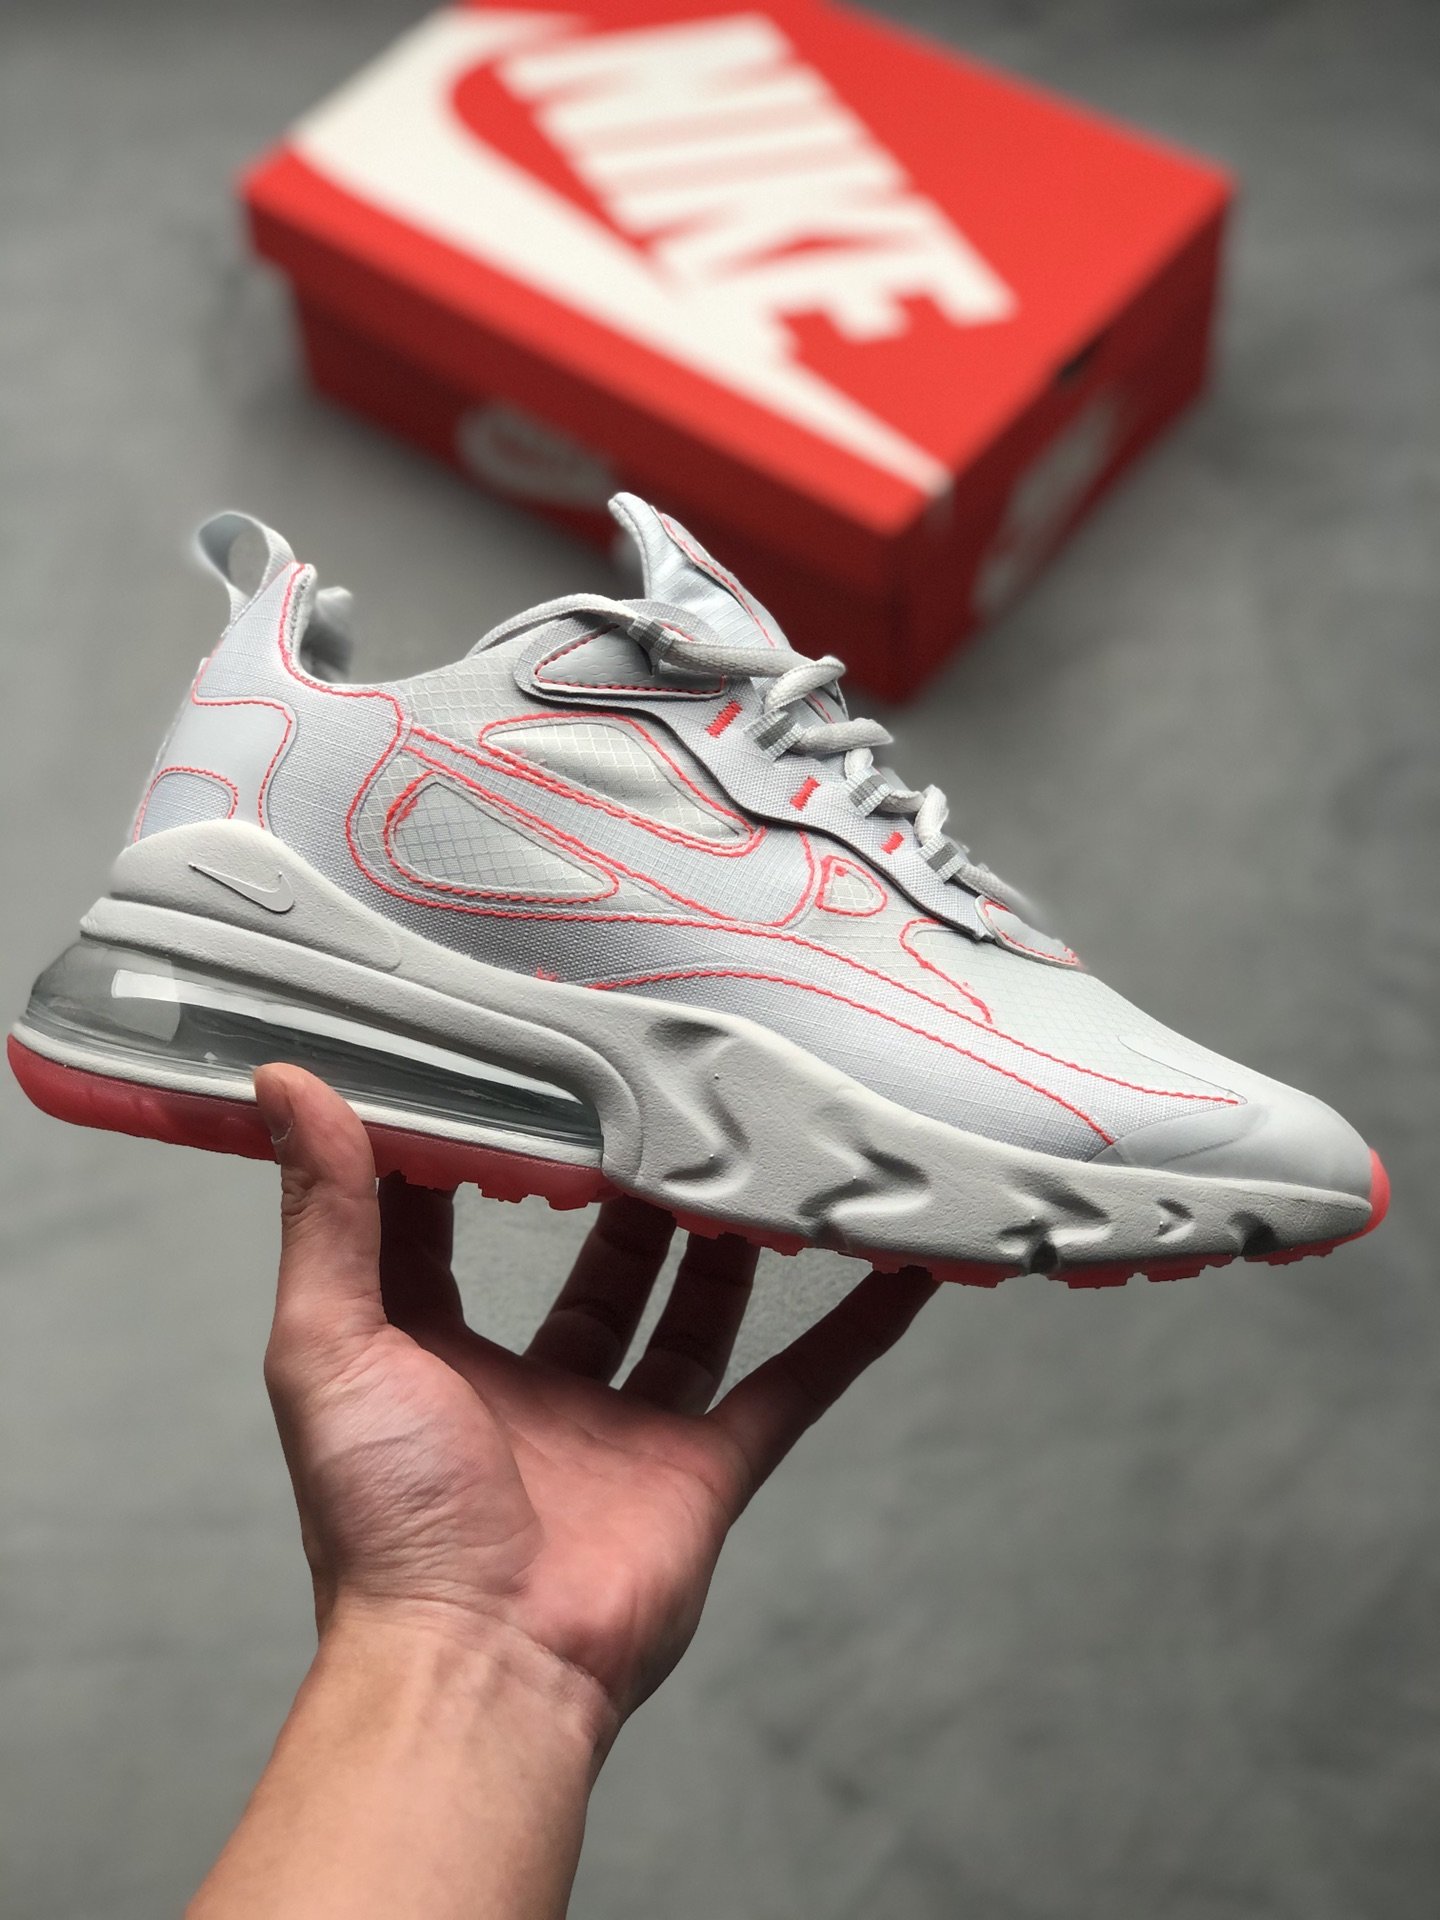 nike react 270 special edition